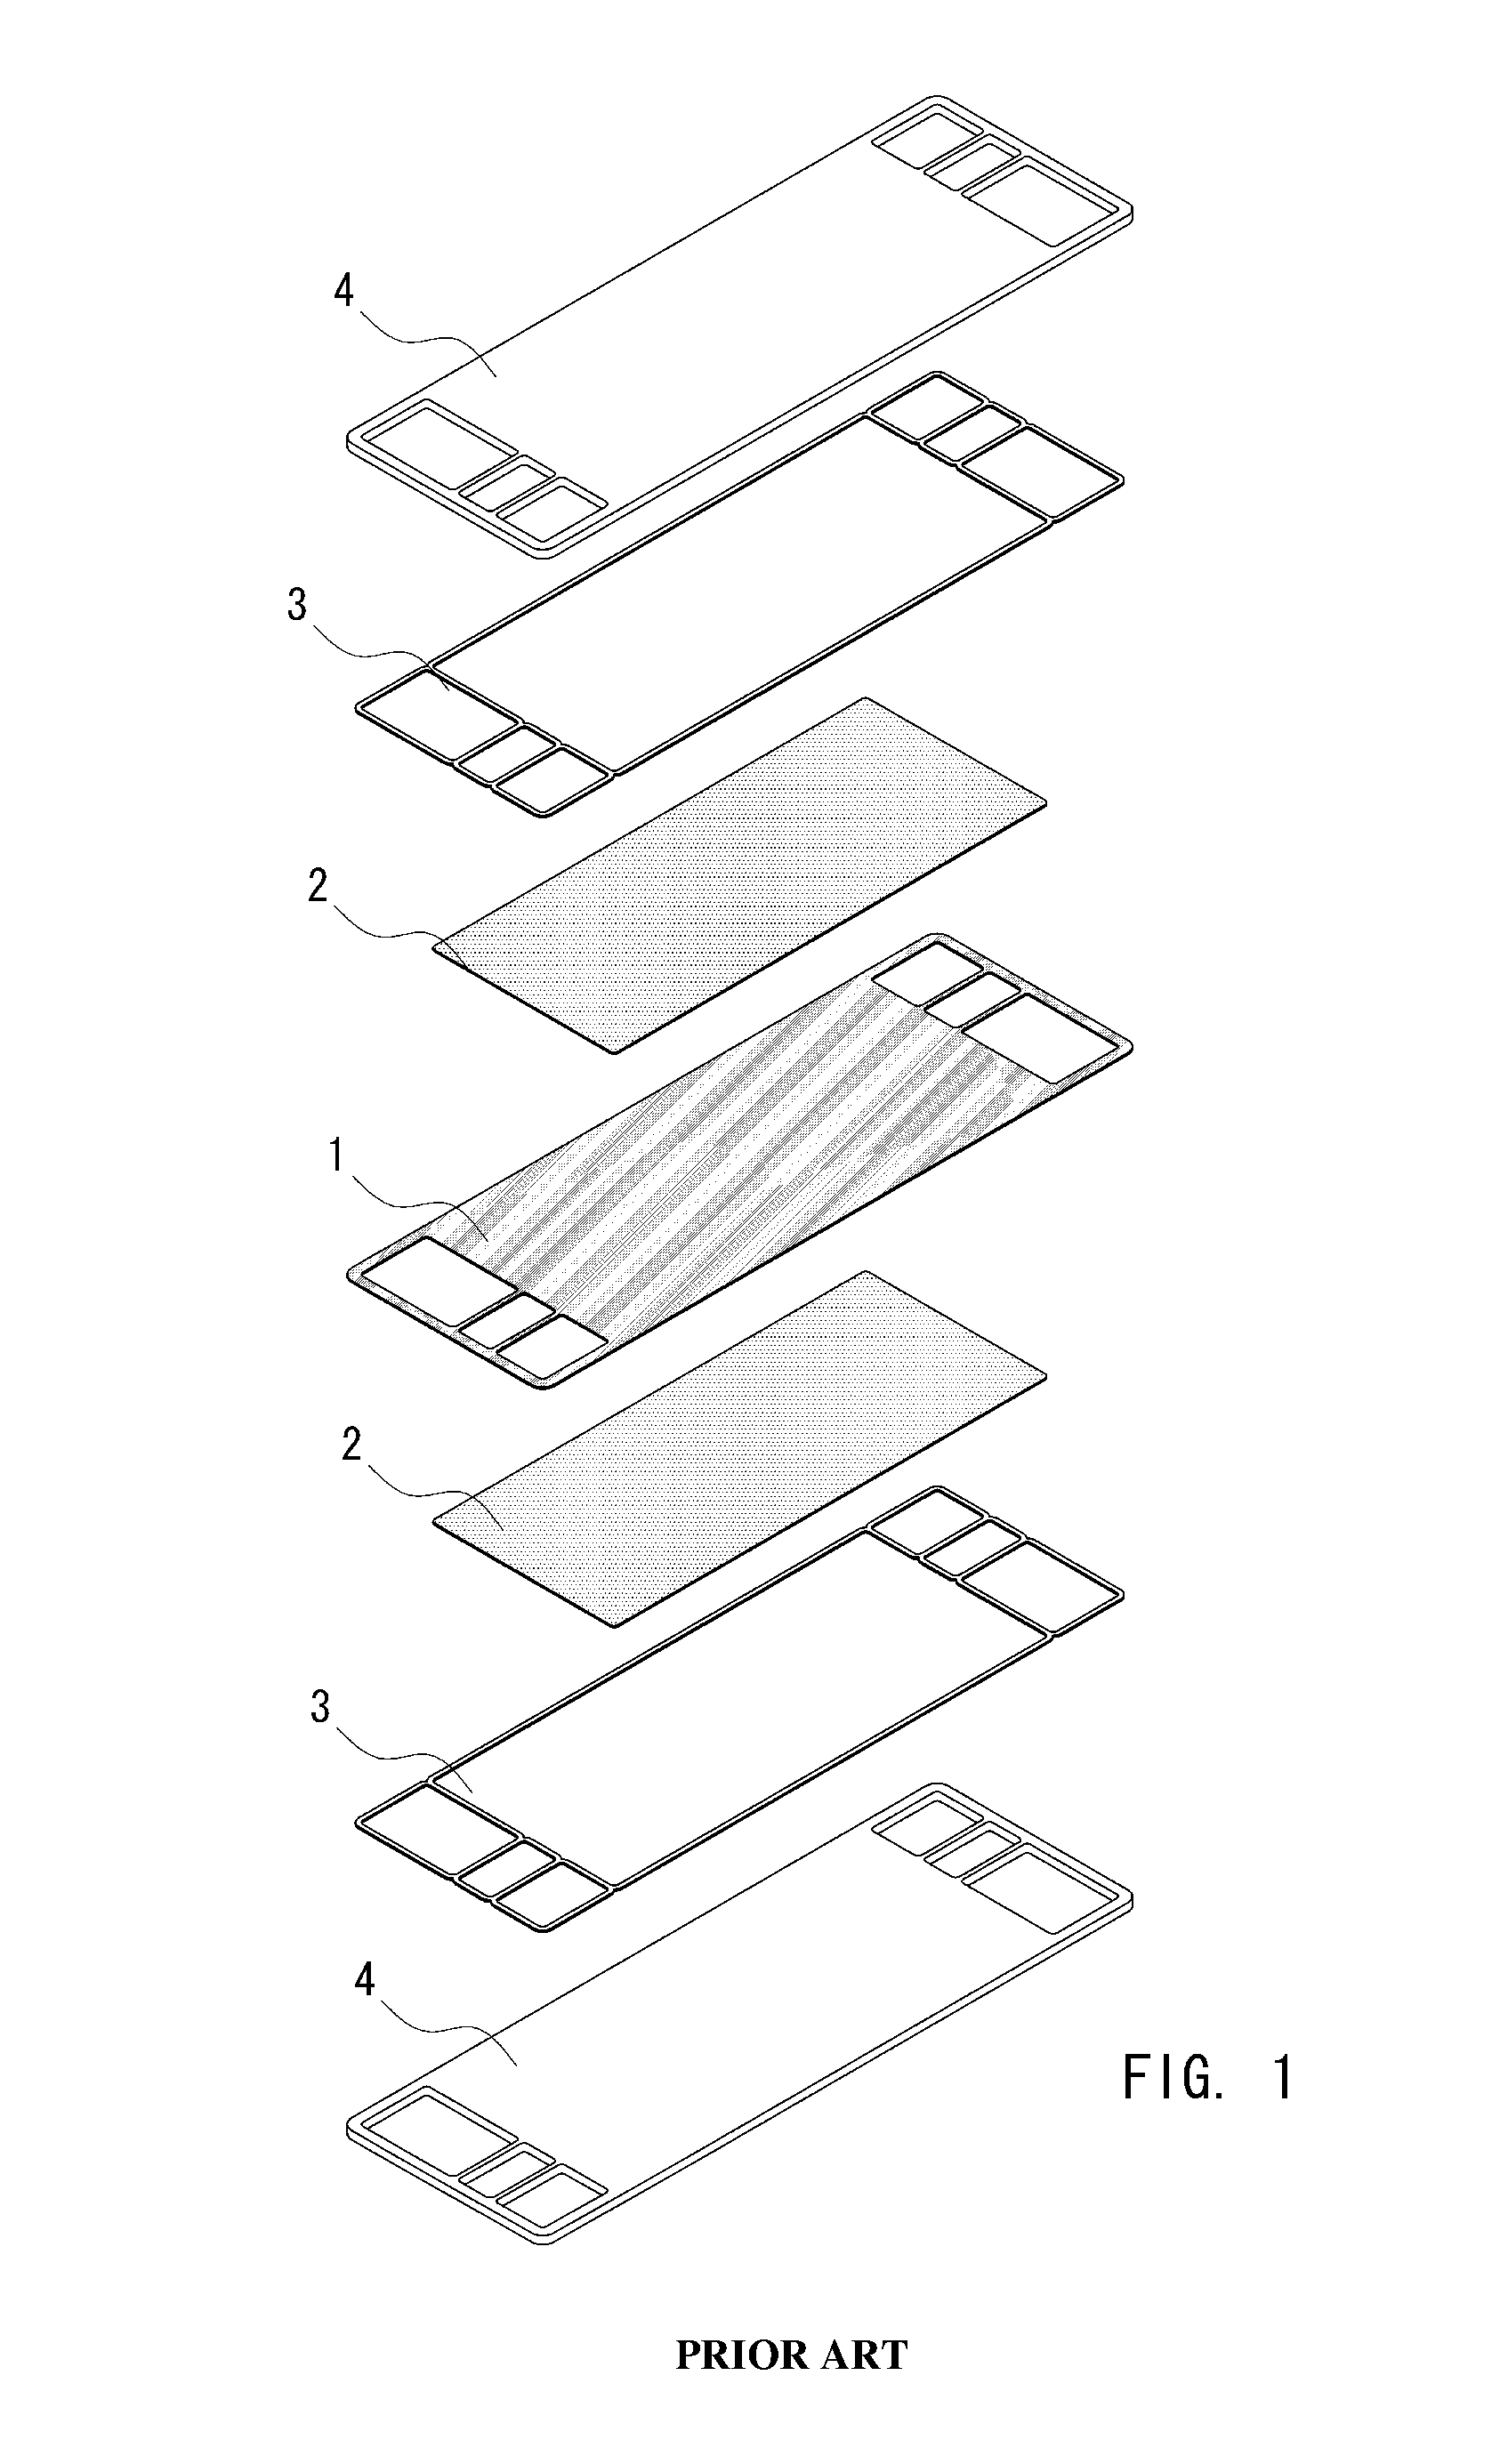 Integrated fluorine gasket manufactured by injection molding for hydrogen fuel cells